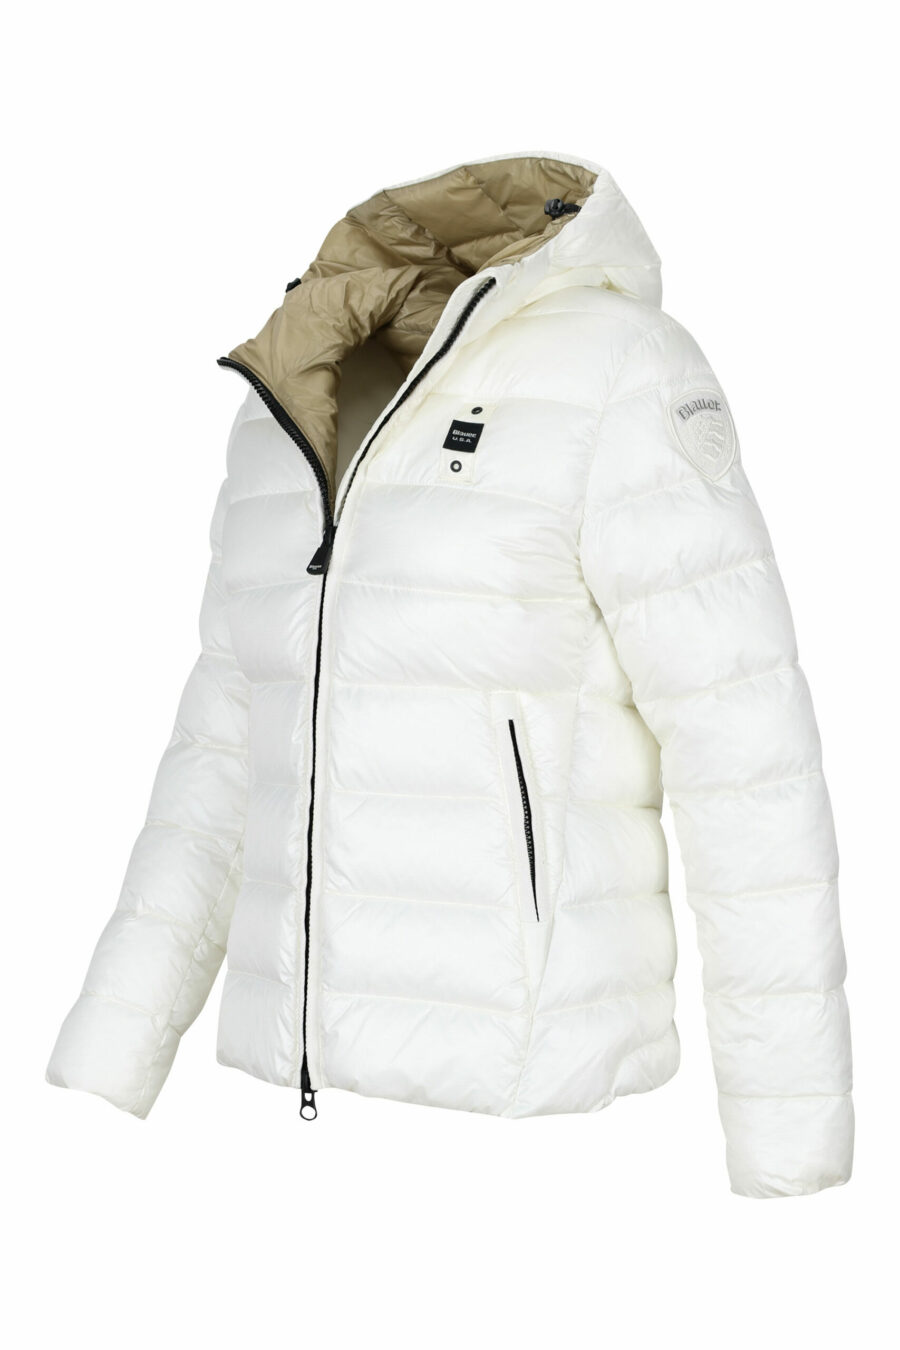 White straight lined hooded jacket with beige inside with logo patch - 8058610675653 2 scaled